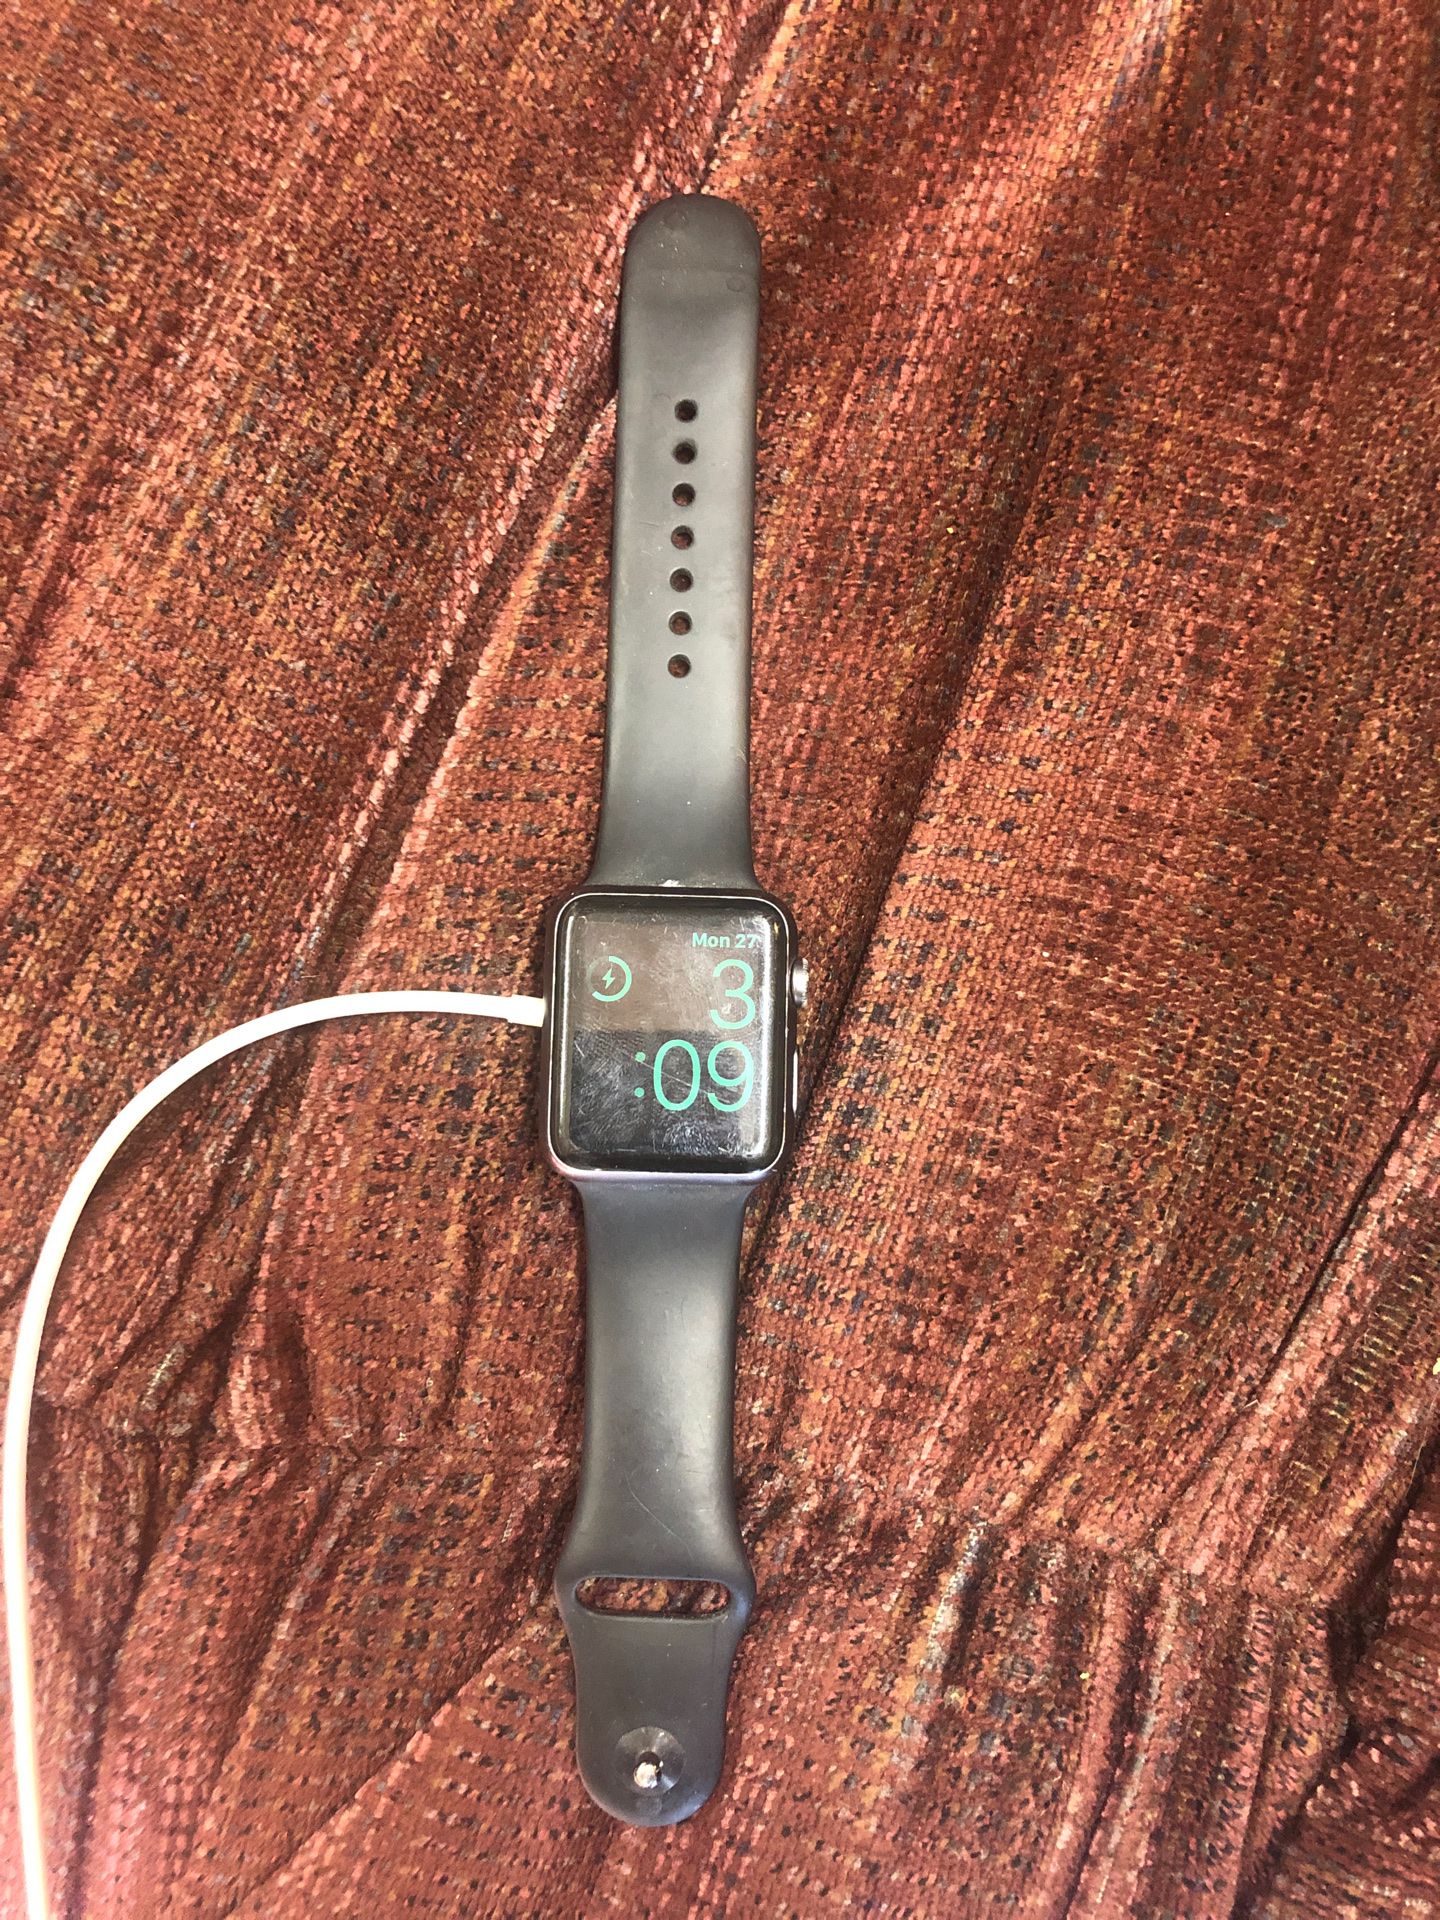 Apple Watch original w/ charger and extra band